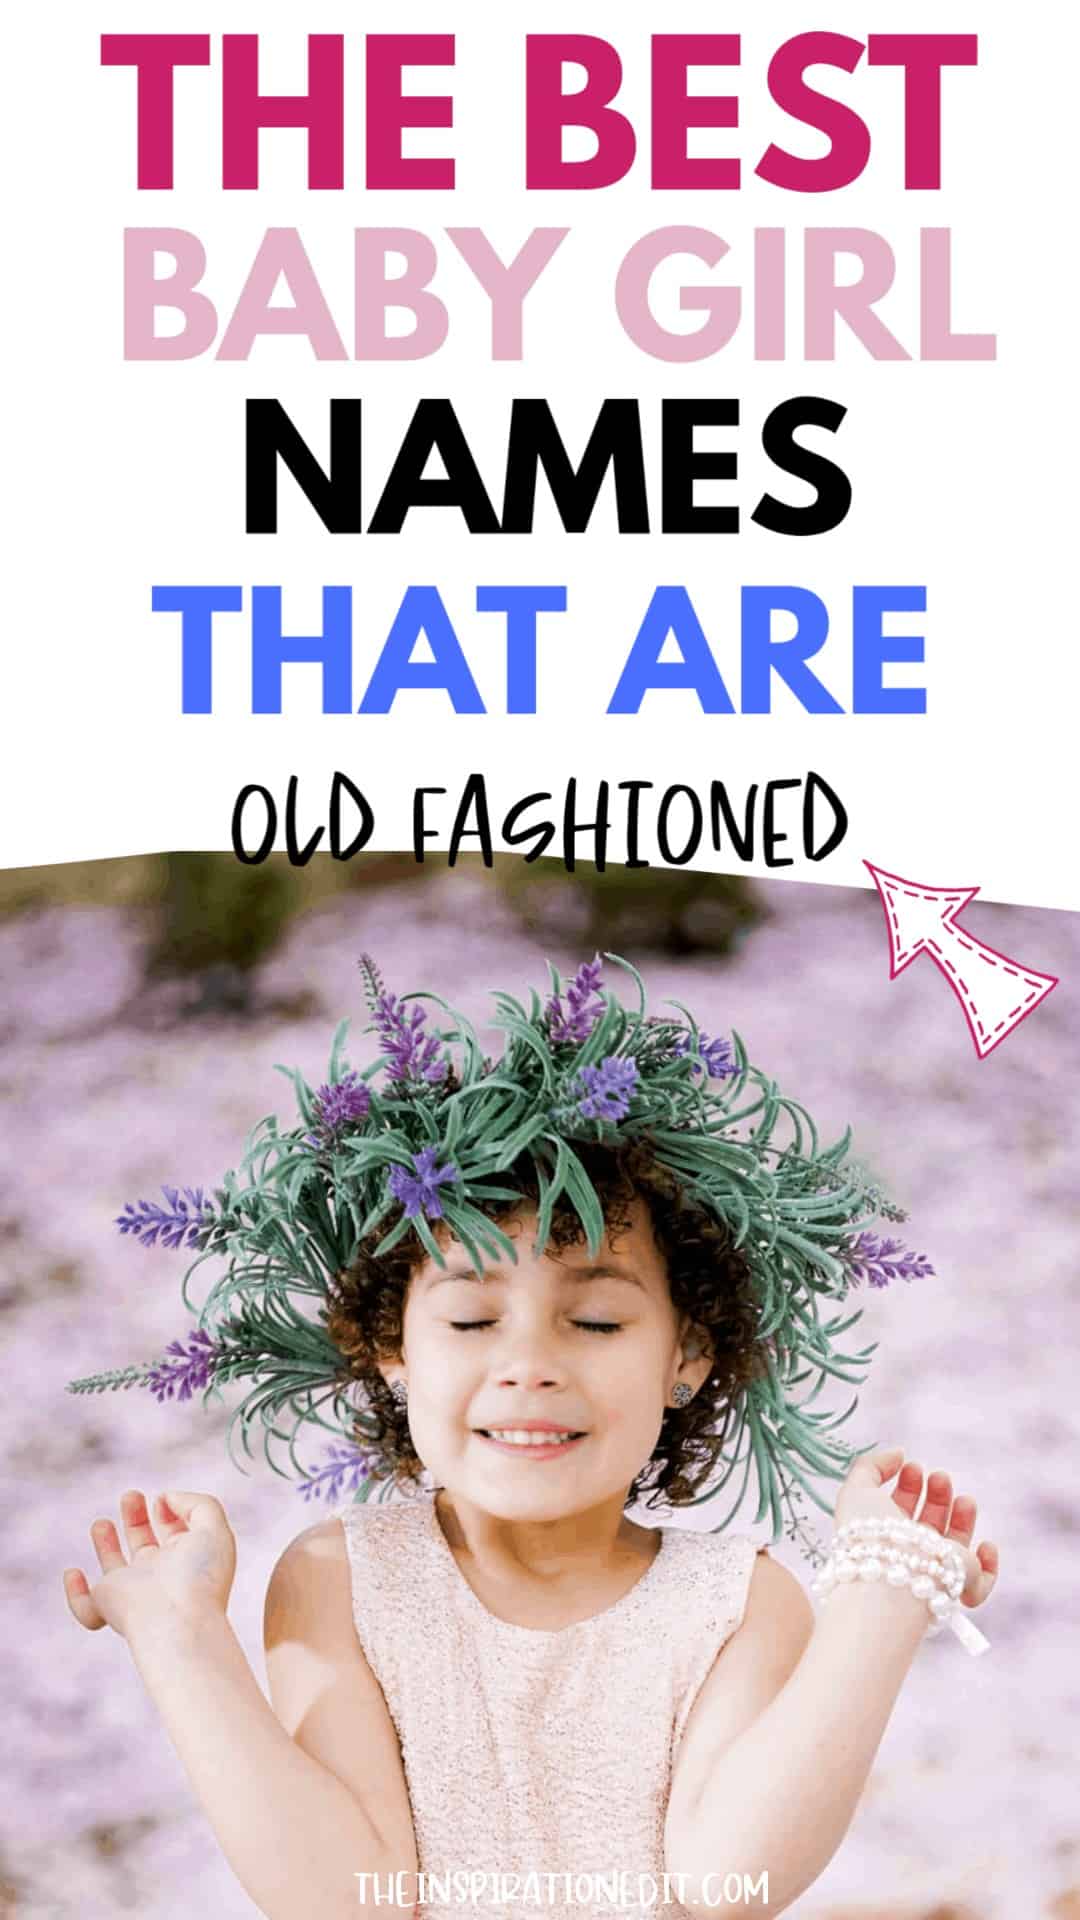 Uncommon & Unique Girl Name Beginning with “B”